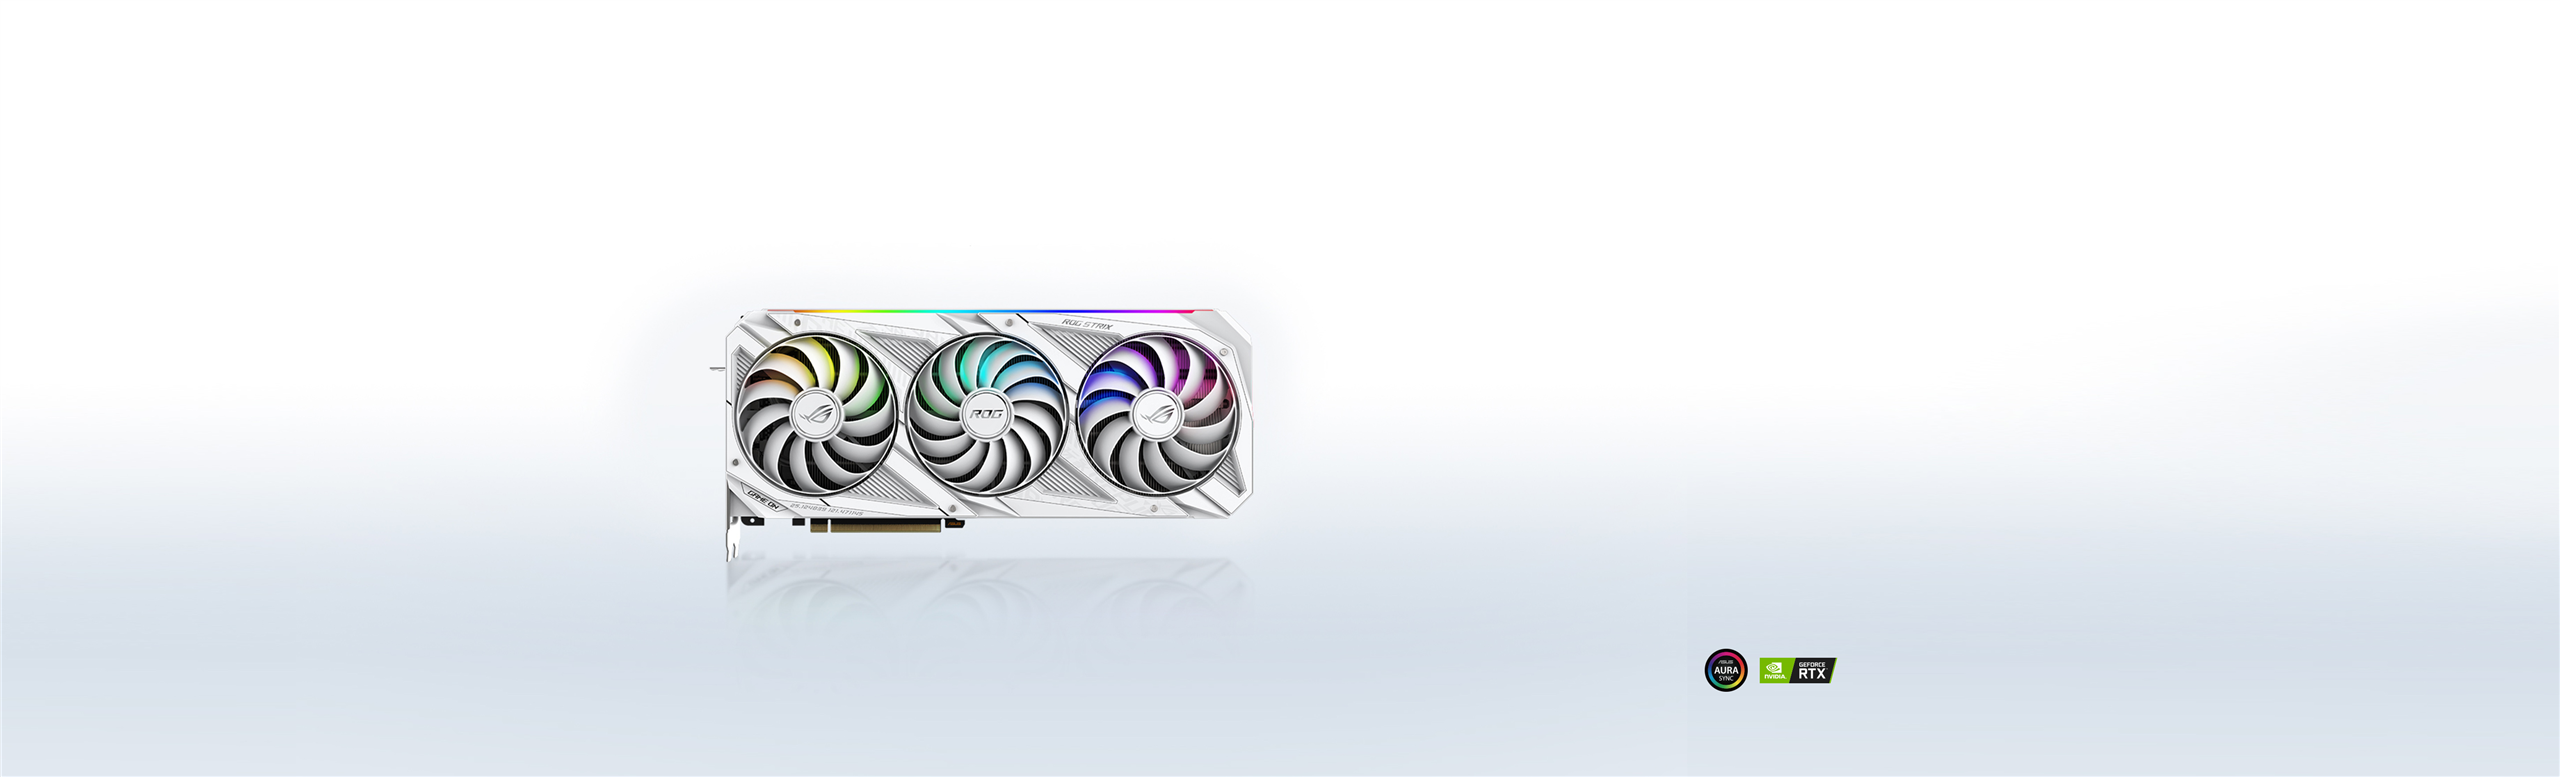 ROG Strix white edition graphics card product photo